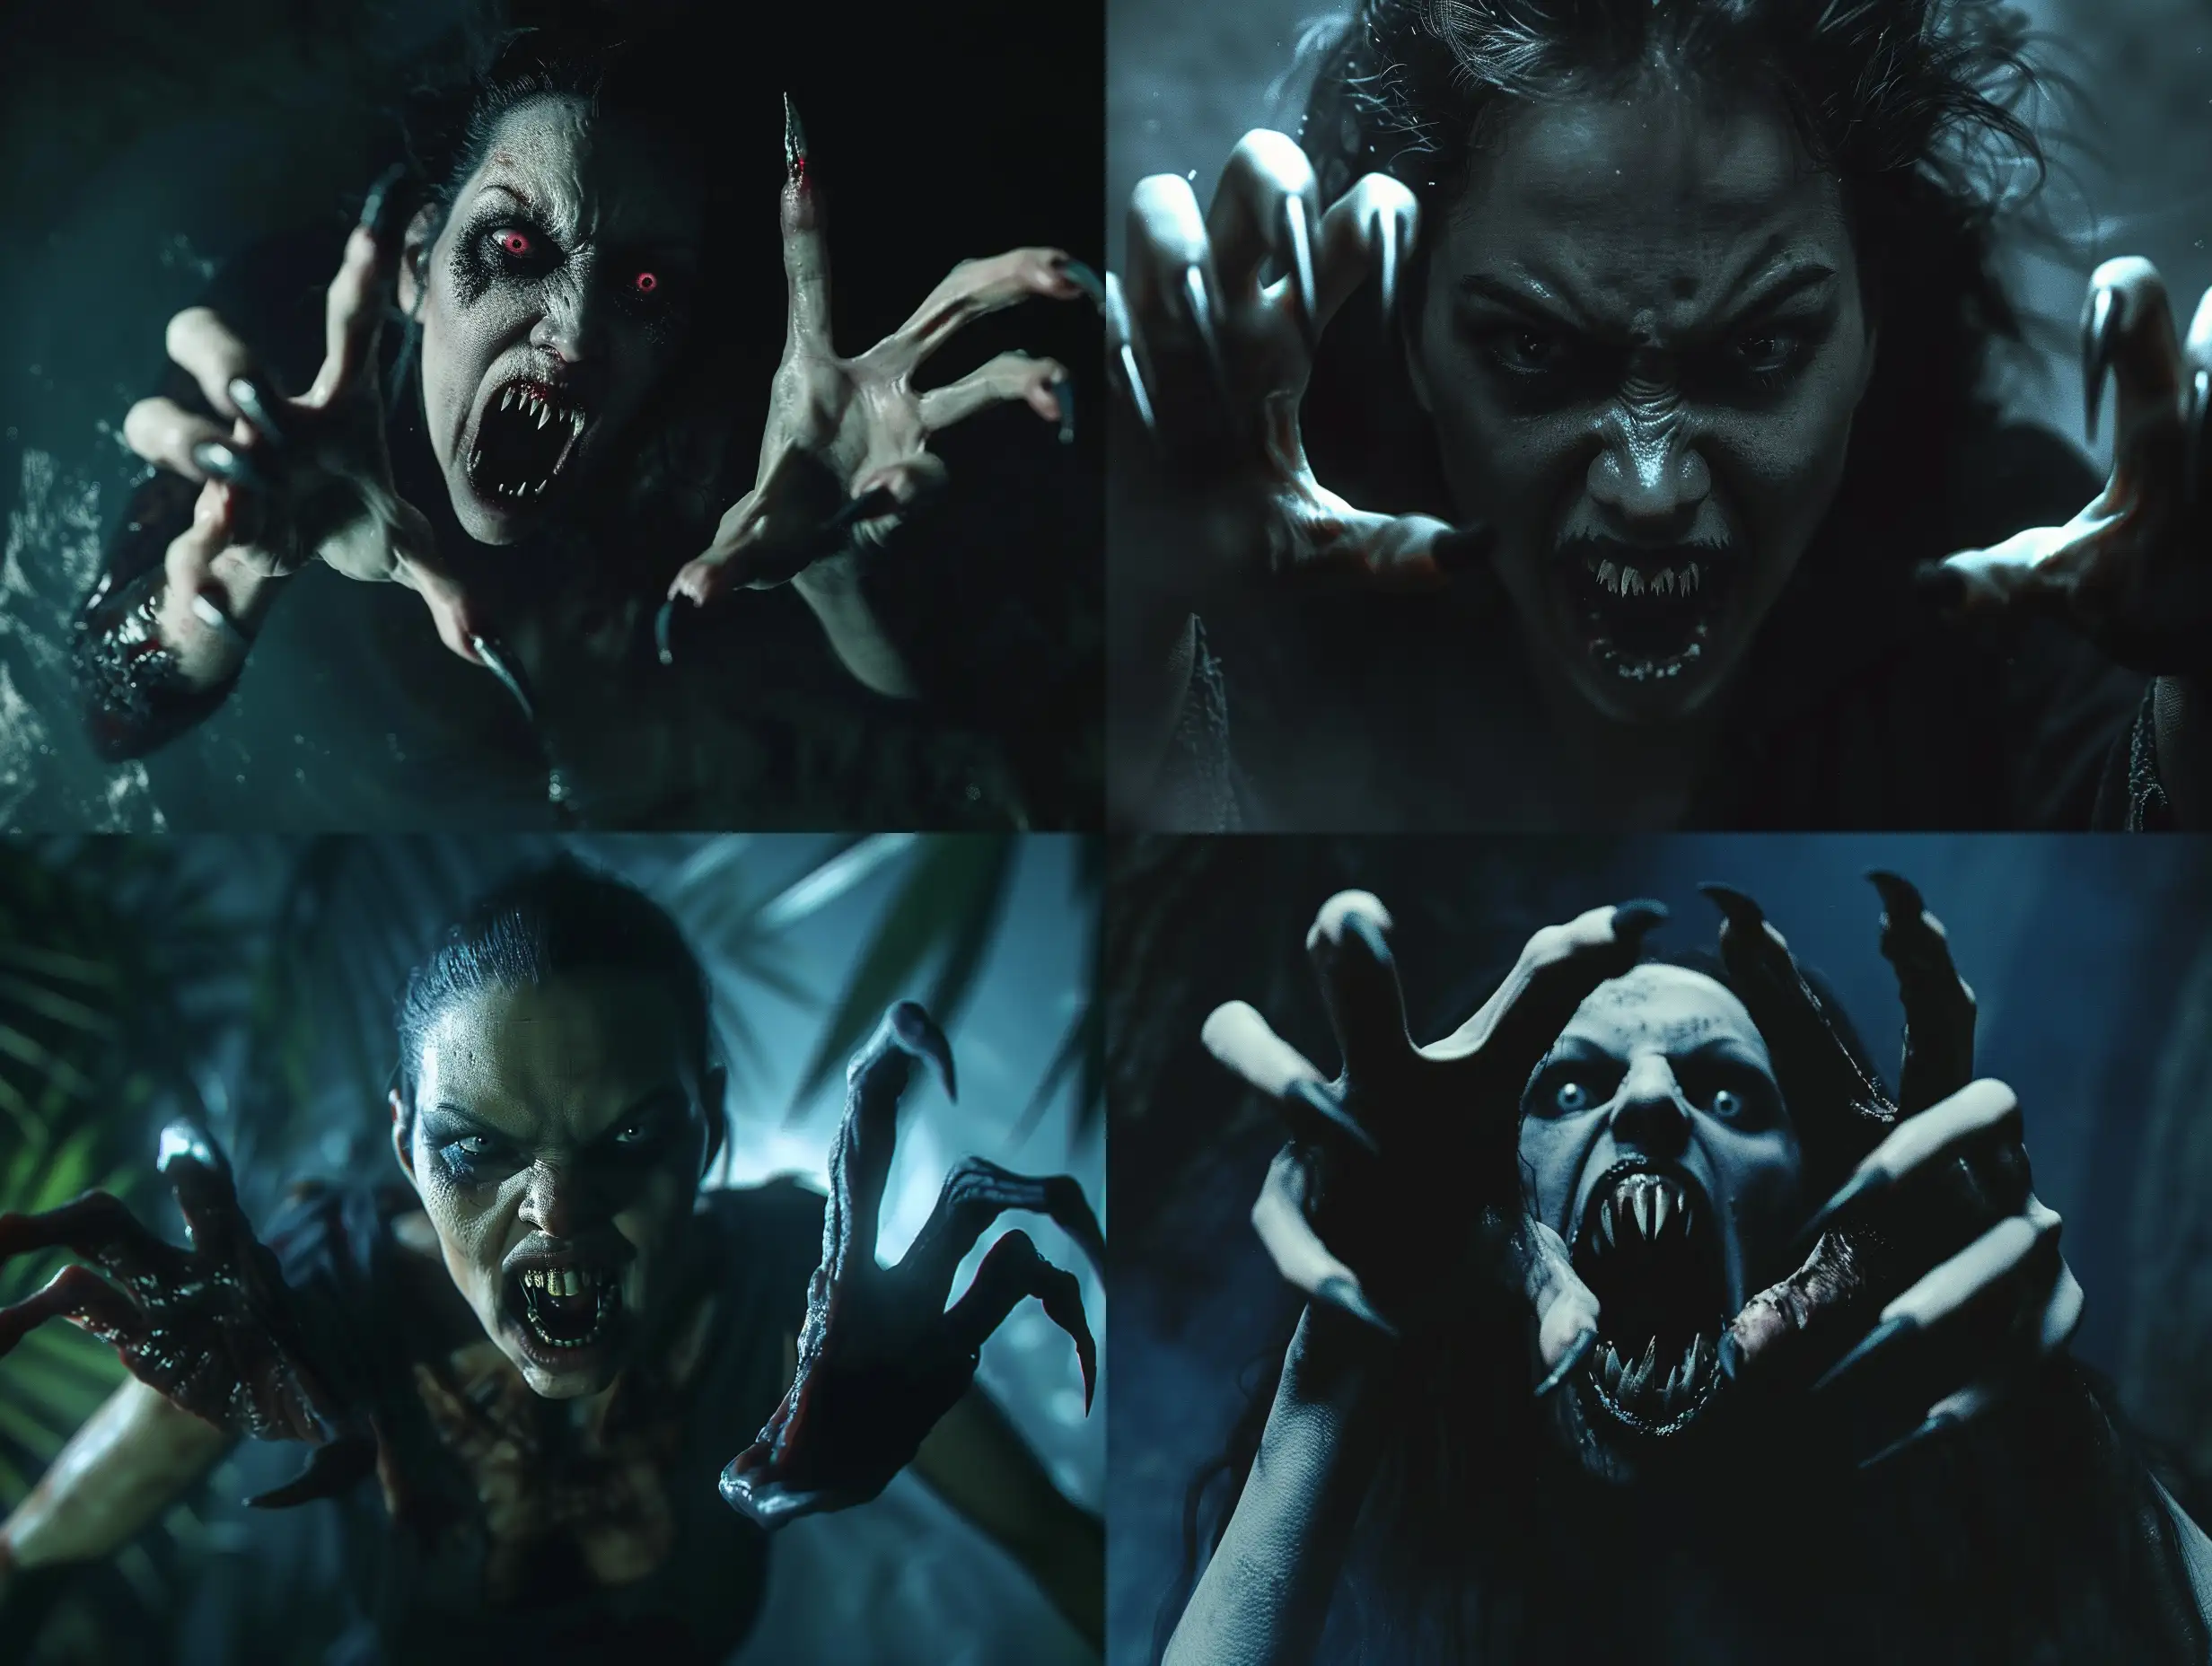 A photorealistic scene of a wild, monstrous vampire woman emerging from the darkness, with an eerie and haunting atmosphere. The vampire has extra long pointed fingernails on each hand, resembling the claws of a predator, and her mouth is threateningly open, revealing terrible teeth that look like fangs. She appears as if she climbed out of the grave, with hyper-realistic details such as full anatomical precision and highly textured features. The scene is cinematic, with intense and atmospheric lighting that emphasizes the smallest details, creating a realistic and aggressive dark atmosphere. The focus is on creating a high-quality, hyper-realistic portrayal of this undead creature, ensuring that every aspect is detailed and textured to convey a sense of horror and terror. The aim is to generate a night-time scene that is truly creepy, spooky, and terrifying while maintaining realistic anatomy and flawless execution